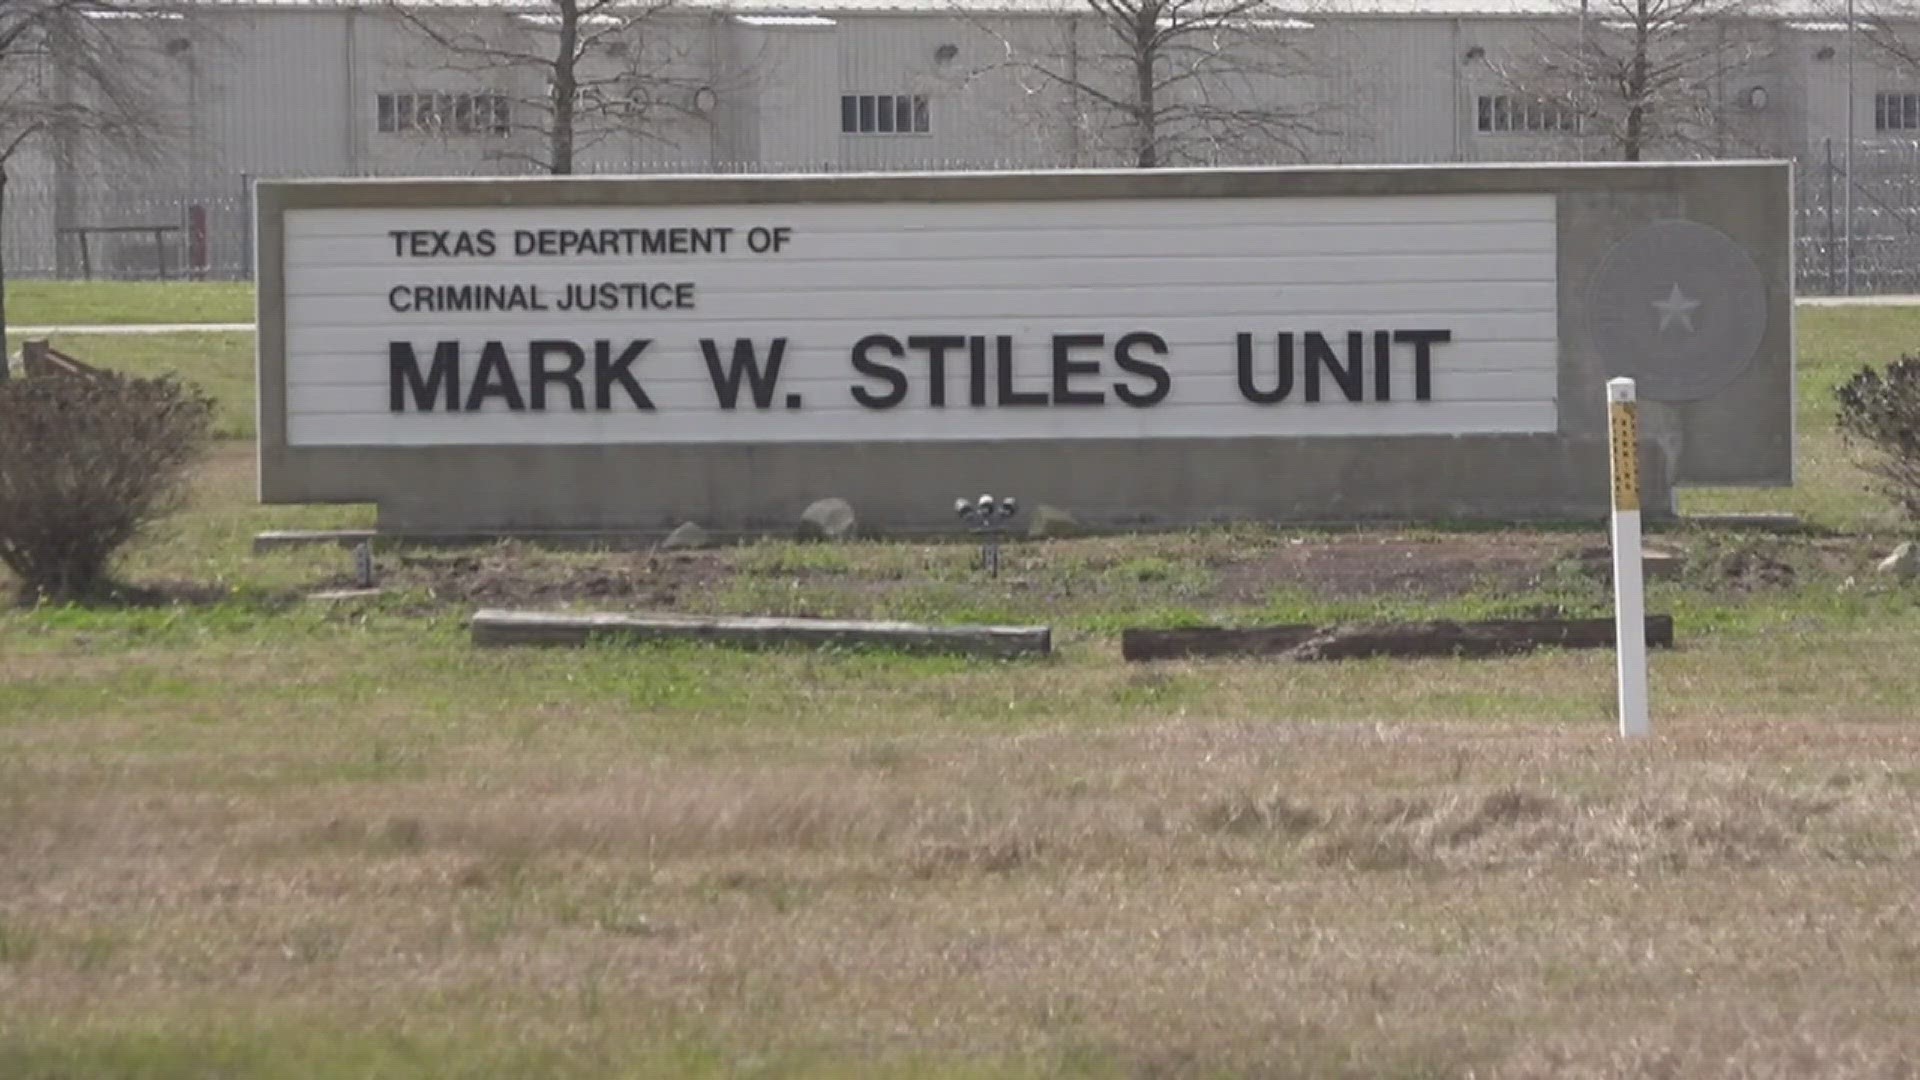 Entire Texas prison system locked down